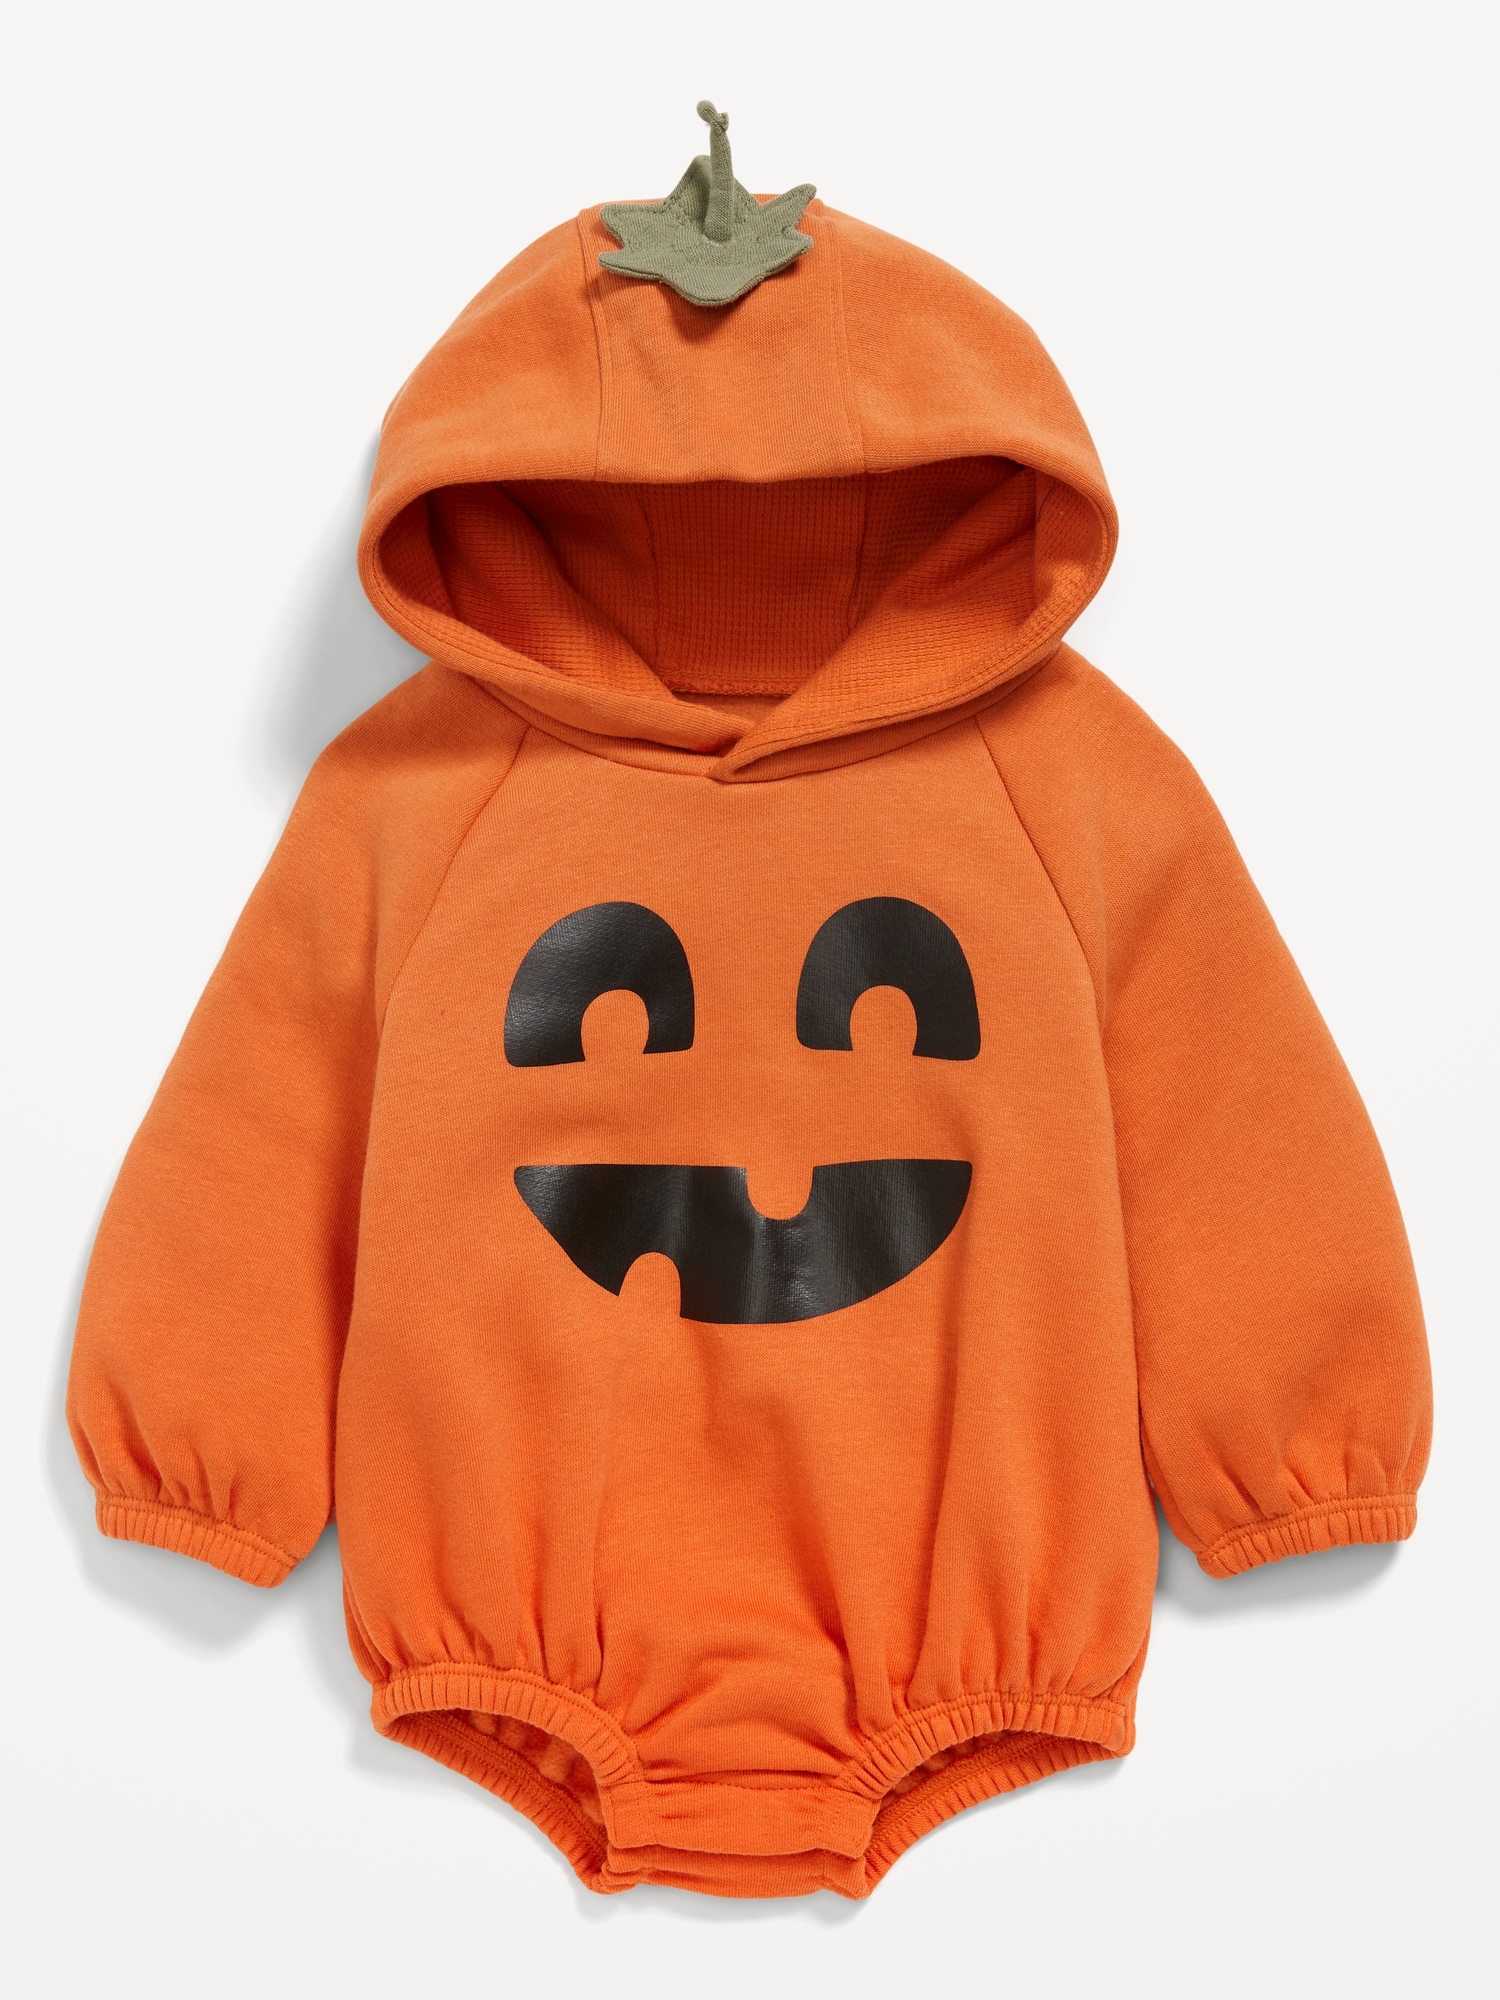 Unisex Pumpkin Costume Hooded One-Piece Romper for Baby | Old Navy